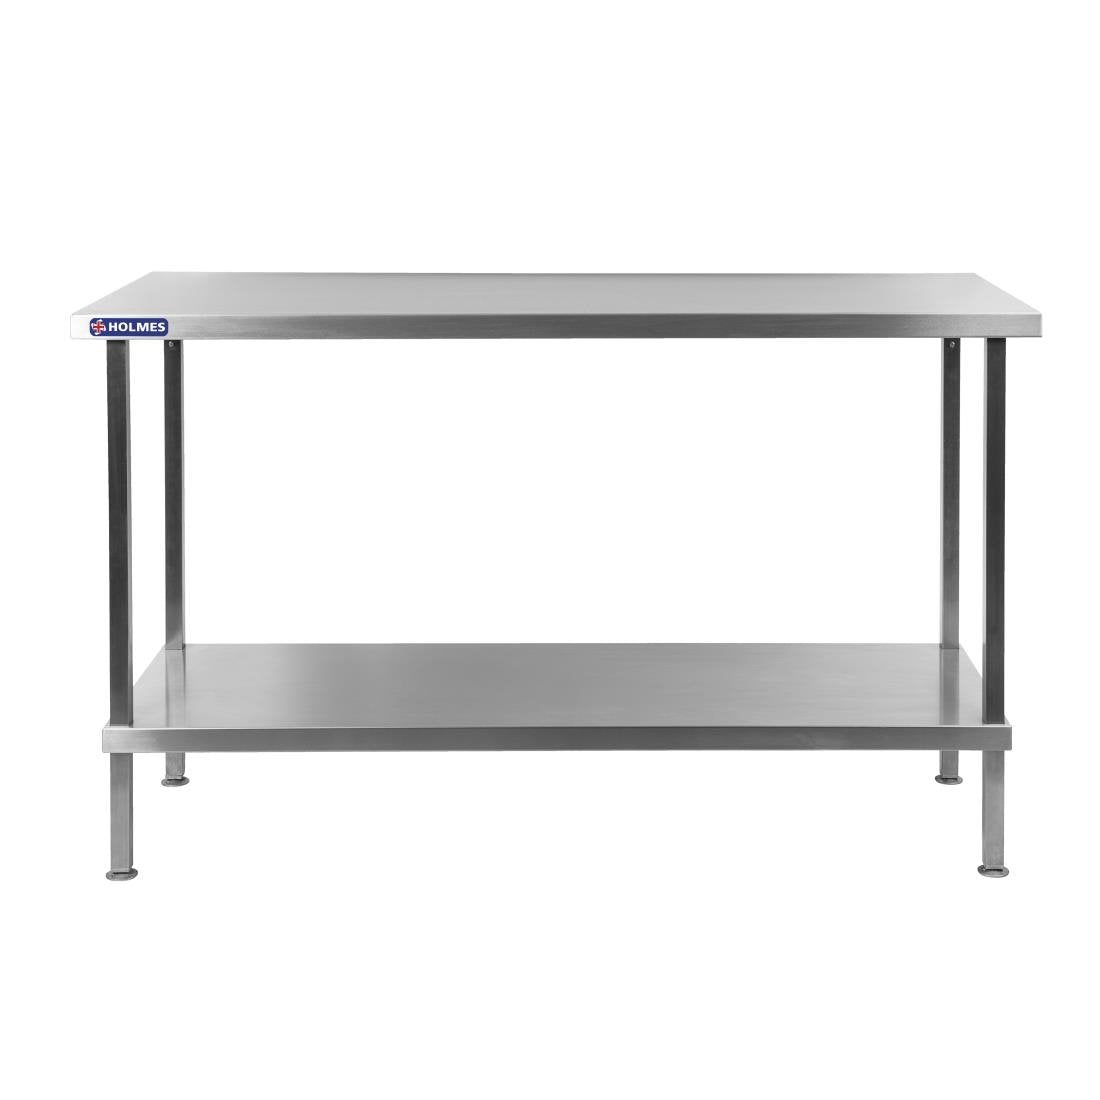 DR044 Holmes Stainless Steel Centre Table 1500mm JD Catering Equipment Solutions Ltd